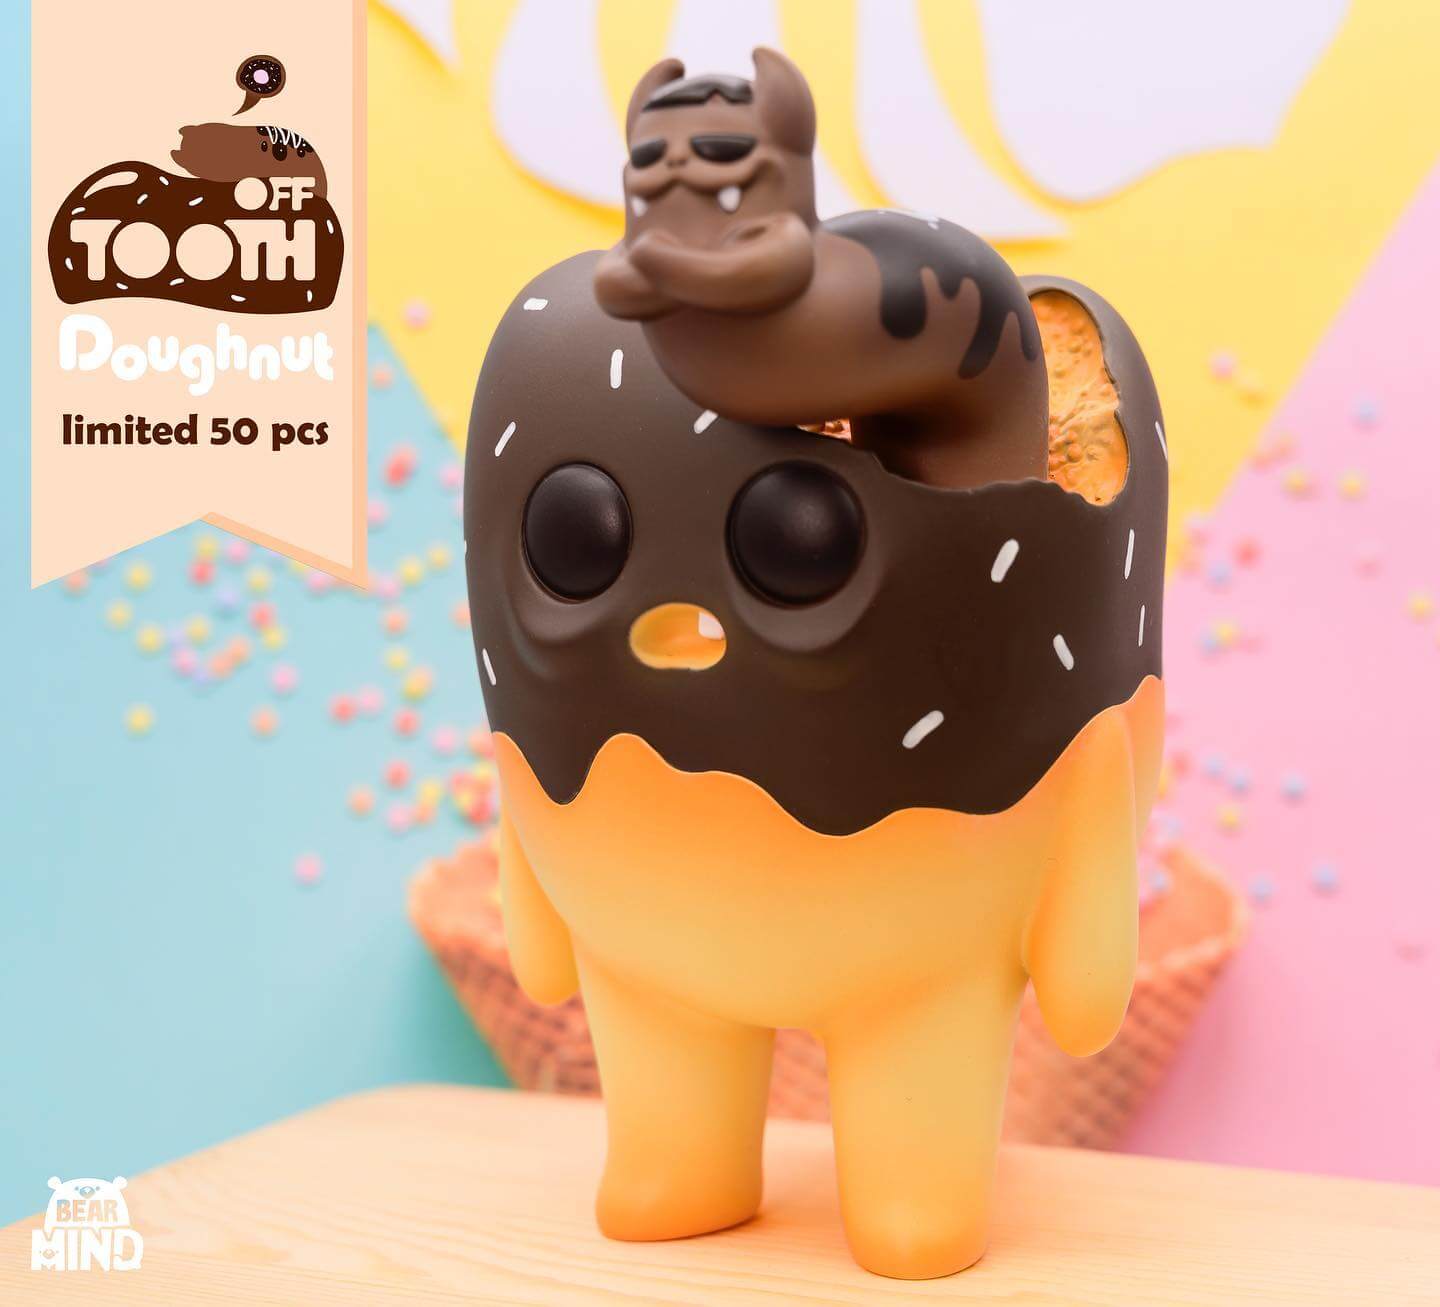 Tooth off - Doughnut Tooth by Bear In Mind Toys